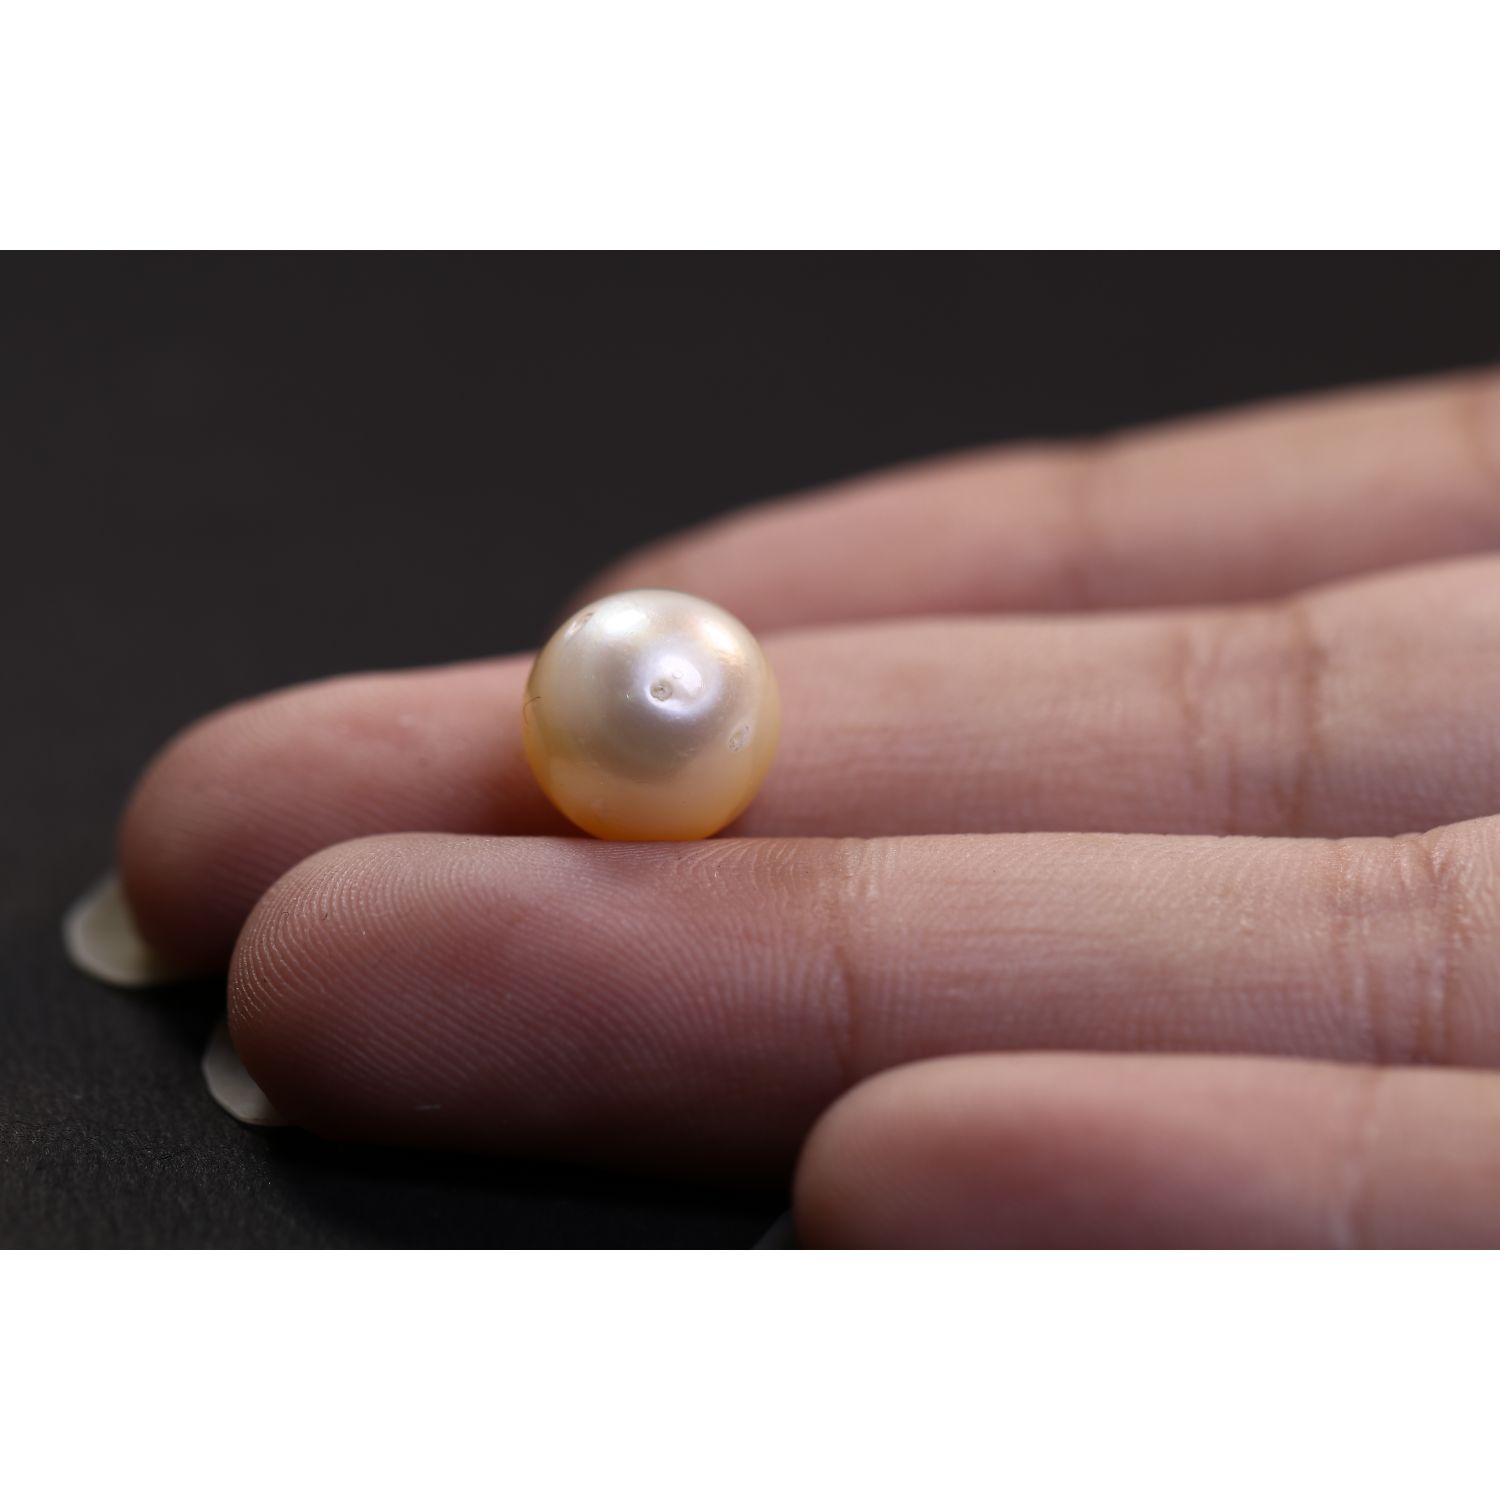 PEARL 6.97 Ct.